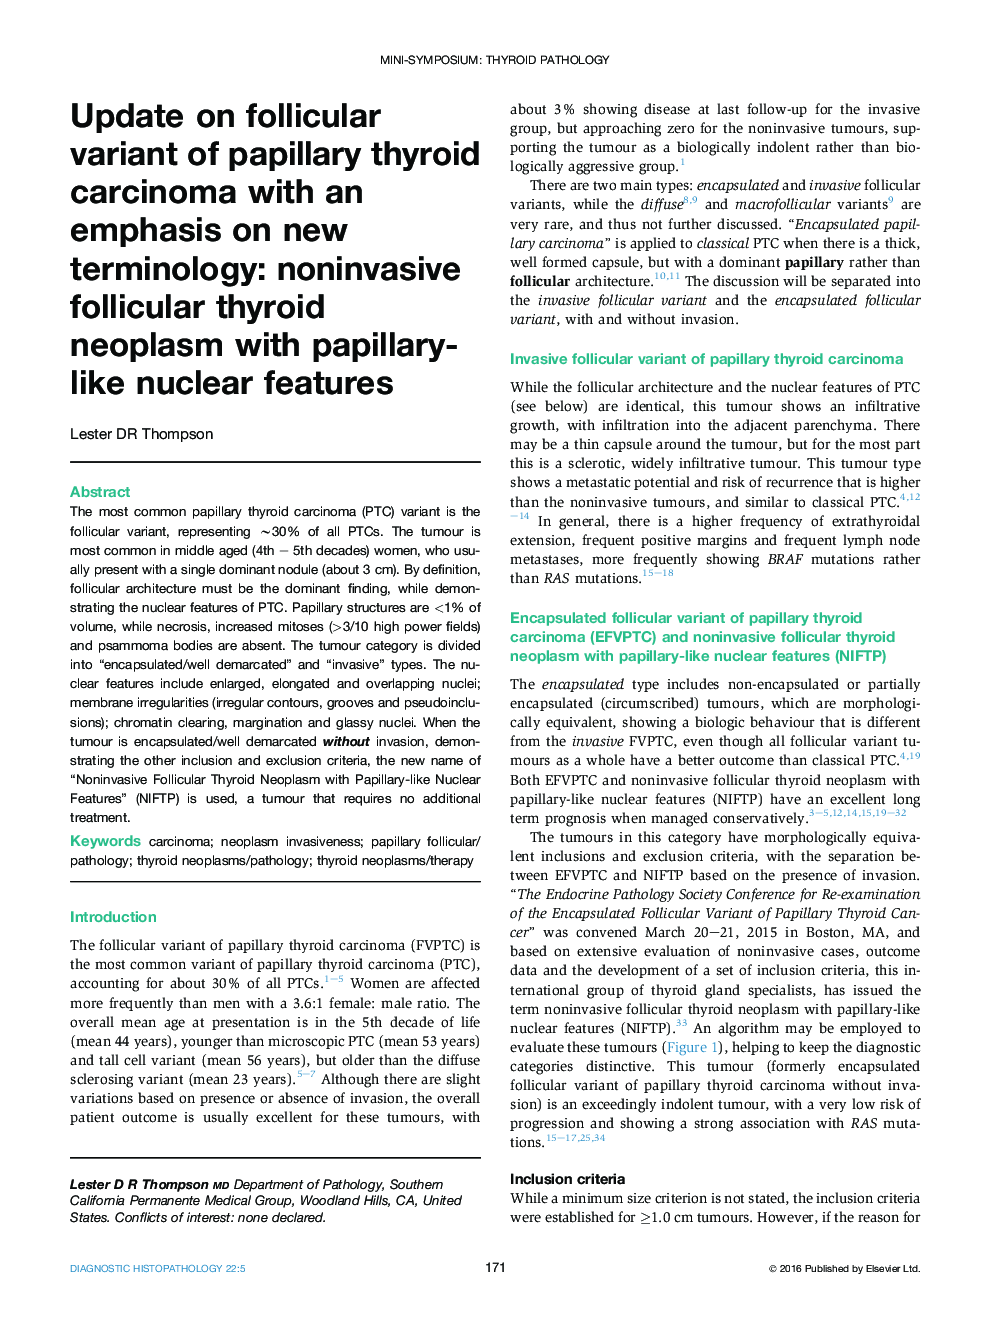 Update on follicular variant of papillary thyroid carcinoma with an emphasis on new terminology: noninvasive follicular thyroid neoplasm with papillary-like nuclear features